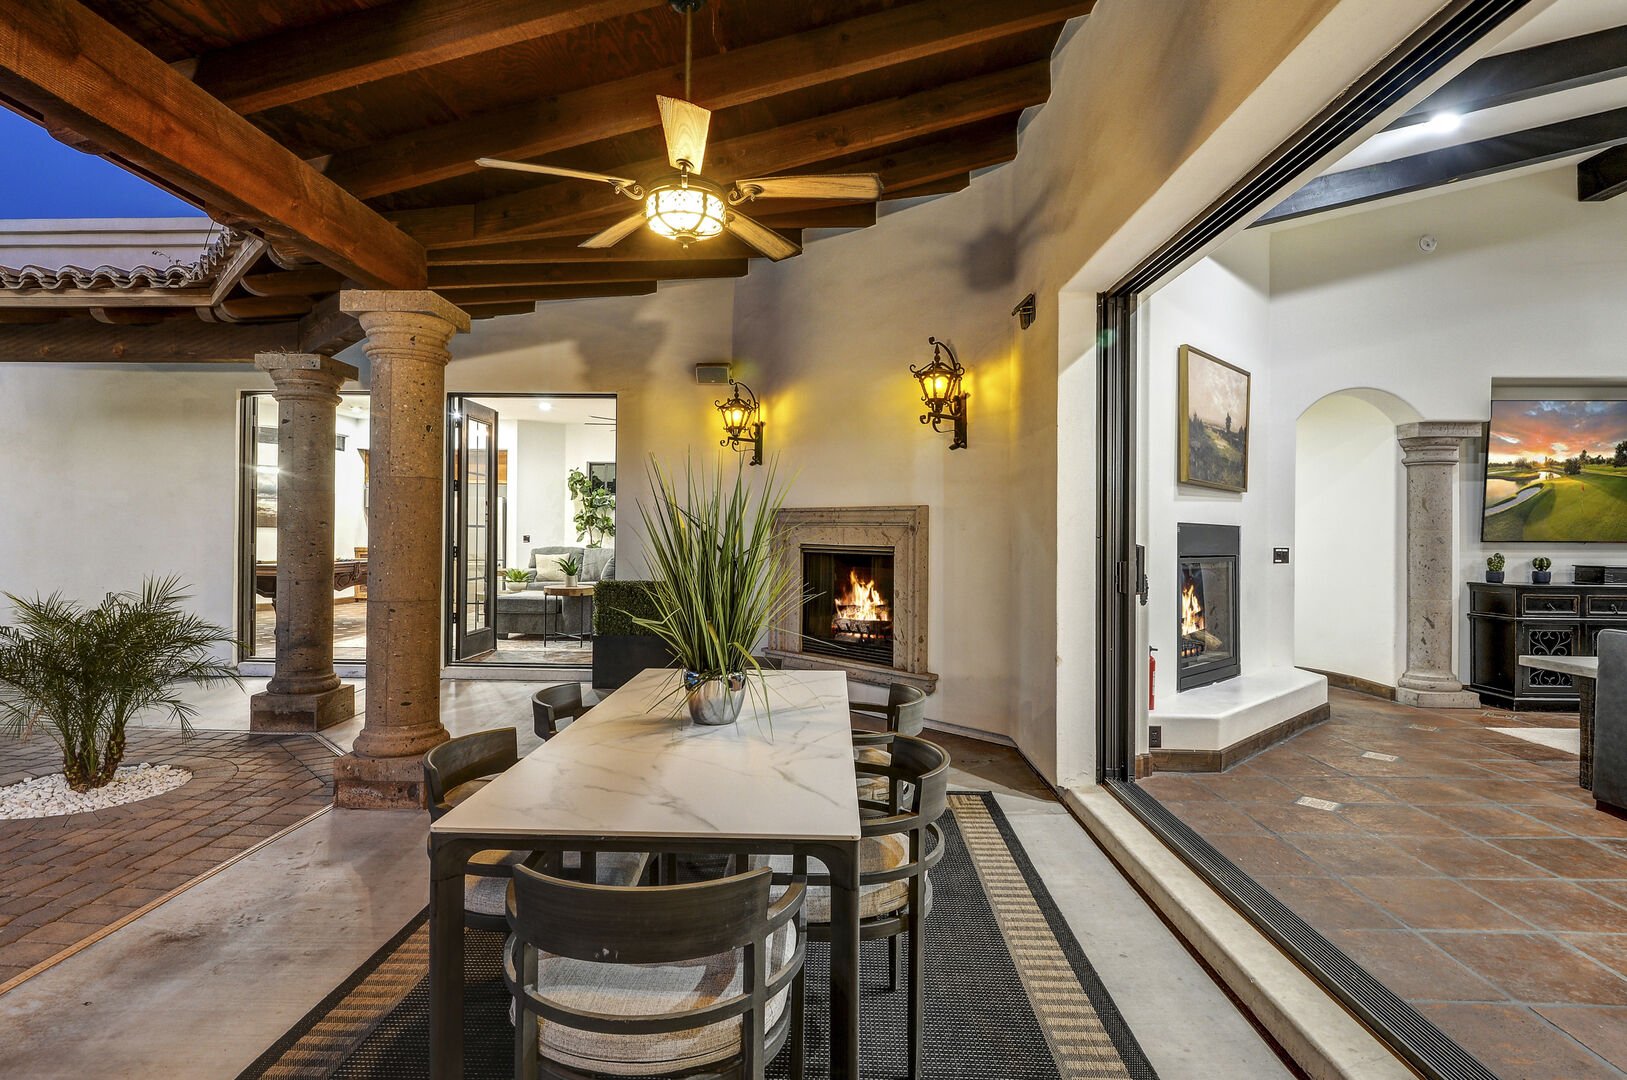 The covered patio at Casa Palacio offers a seamless connection to the living room. This design invites guests to enjoy the best of both worlds, with a sheltered outdoor space providing a tranquil extension of the inviting living room.